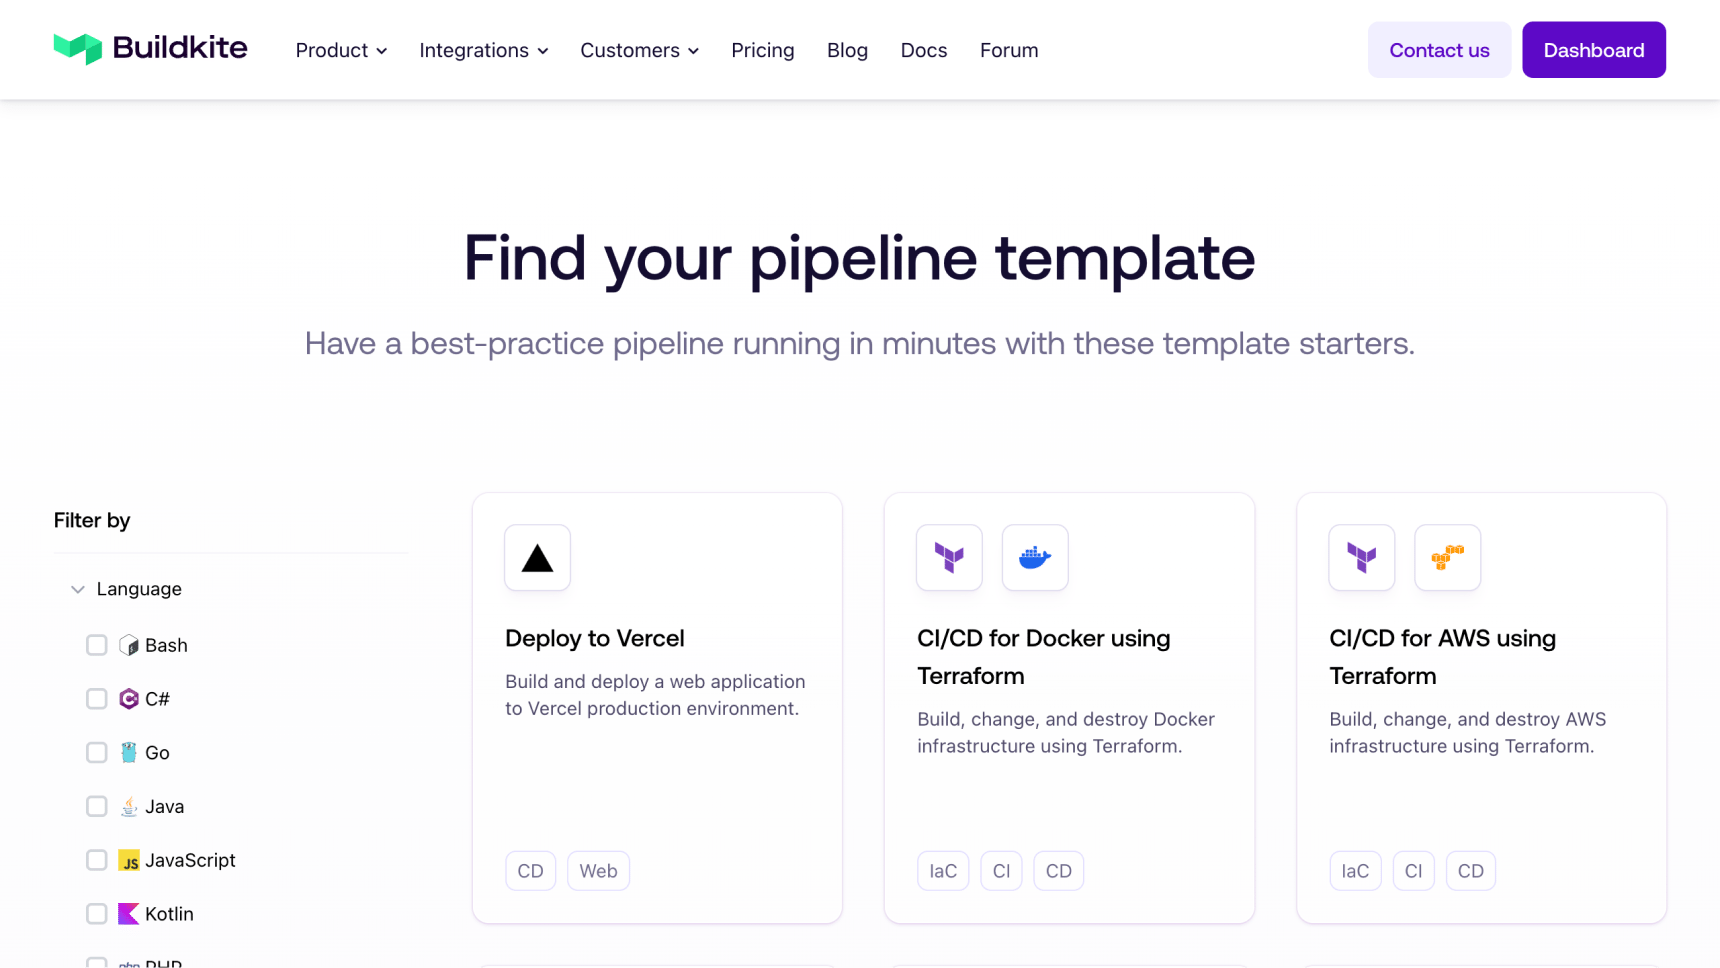 Check out and contribute to a gallery of templates for popular tech stacks.